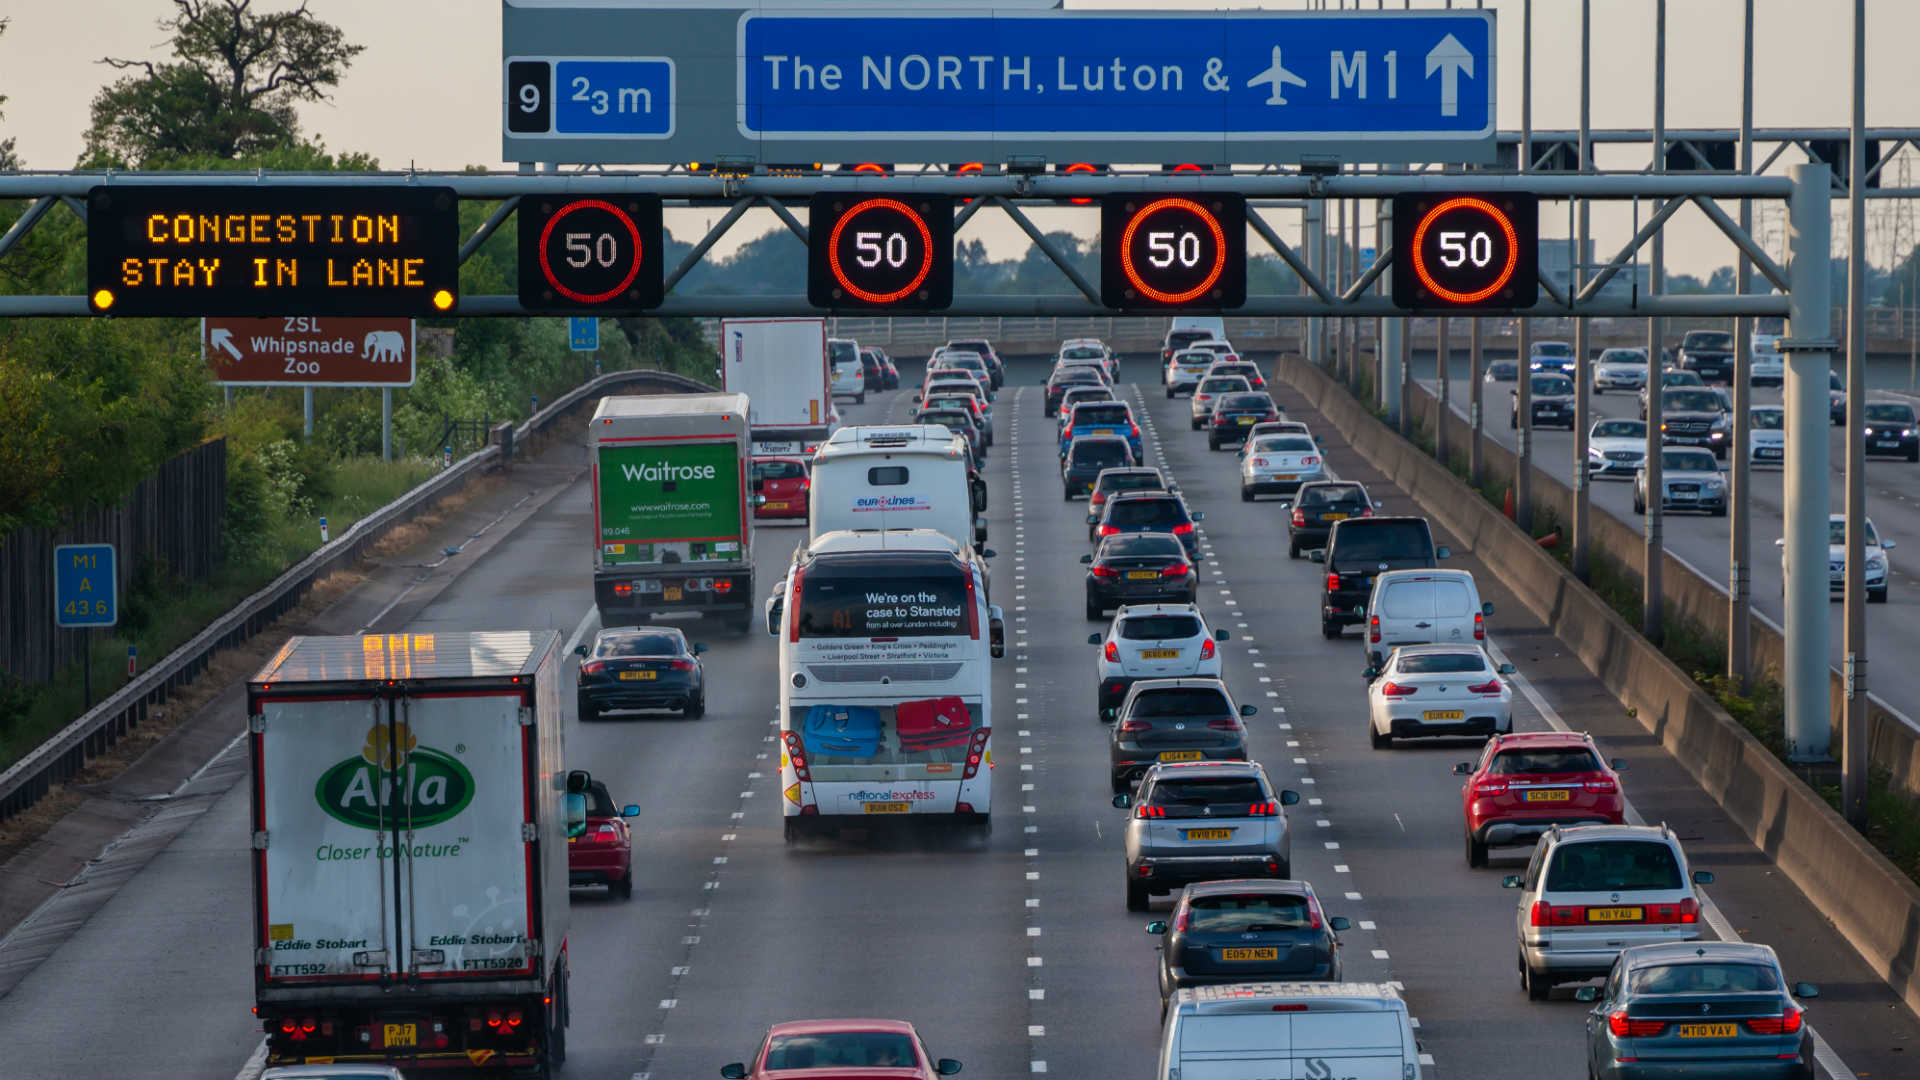 Congestion on the M1 motorway